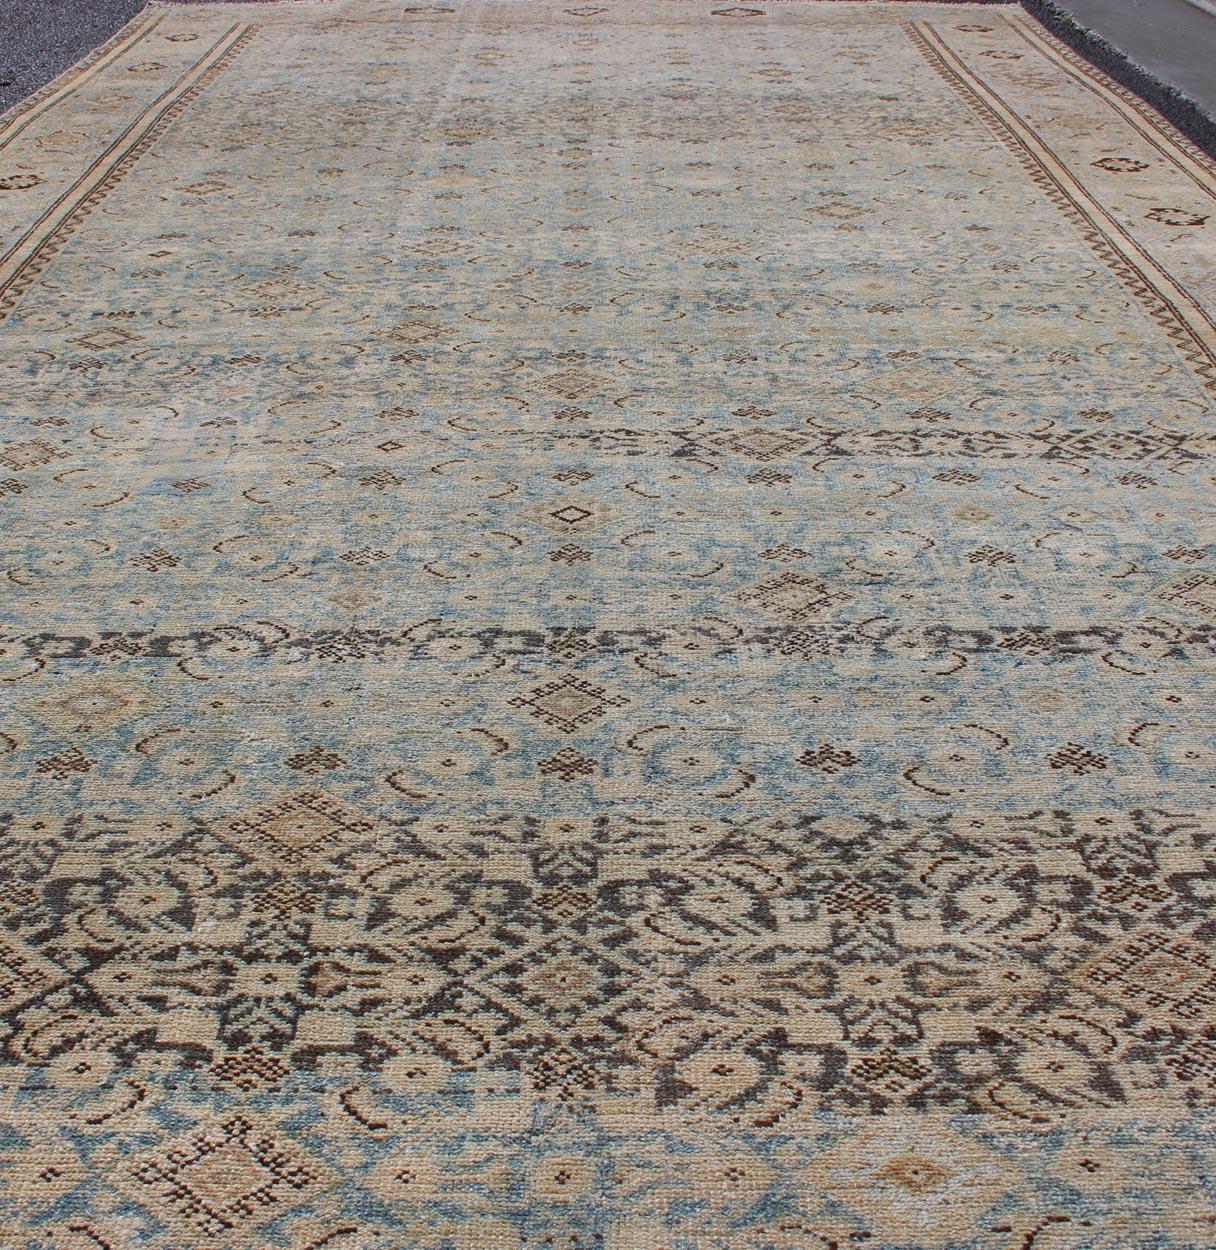 Wool Muted Light Blue Persian Gallery Malayer Rug with Sub-Geometric Design